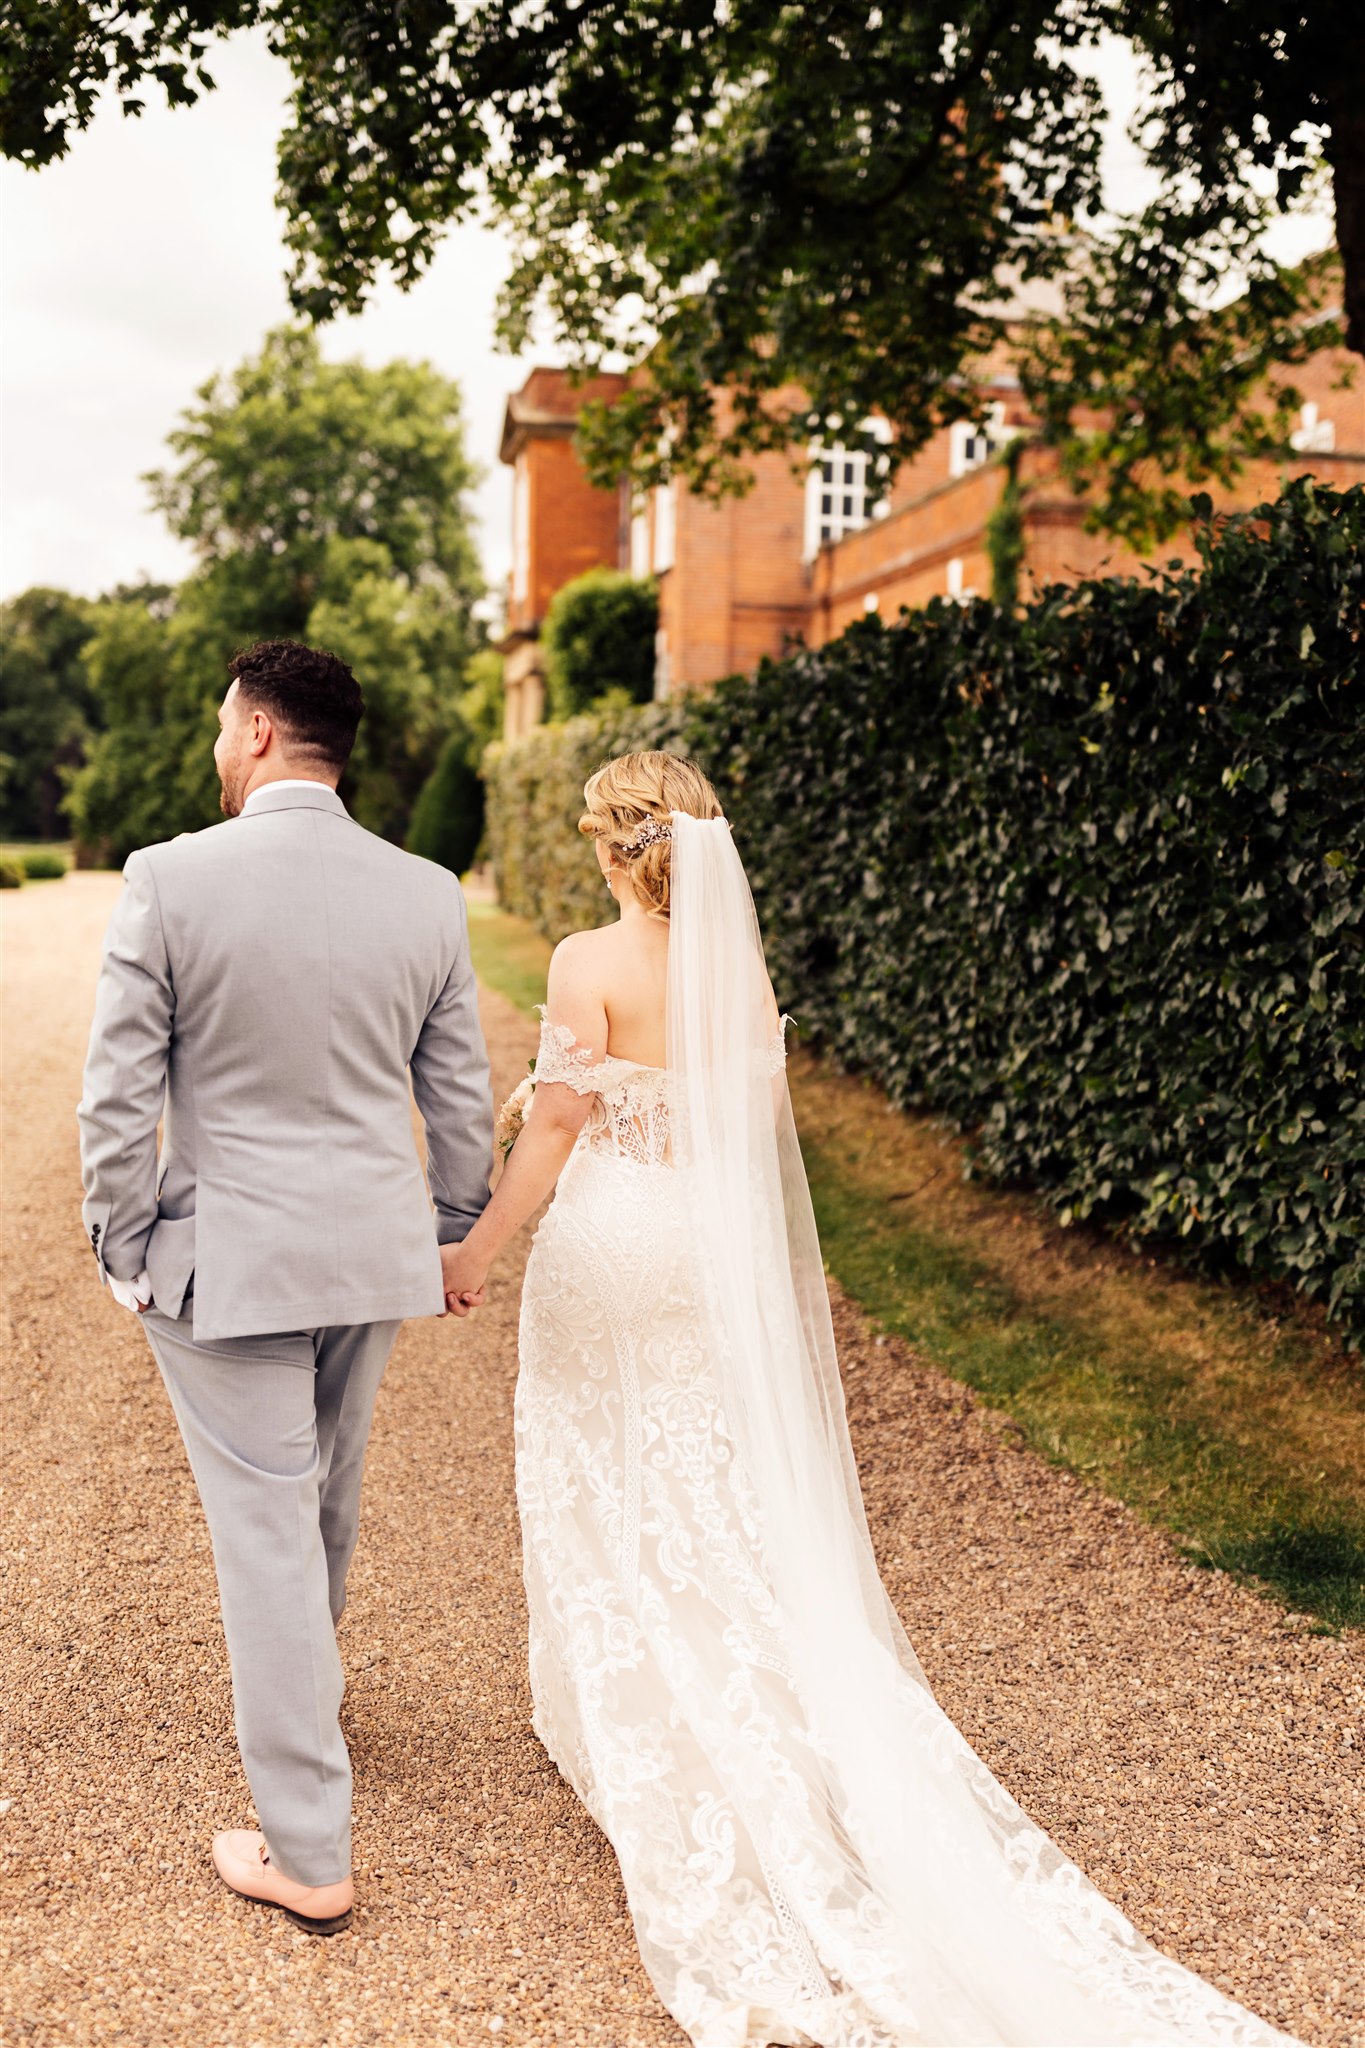 A bride wearing an off the shoulder white lace dress stands next to a groom wearing a grey suit and pink tie with the background of a red brick Georgian mansion.